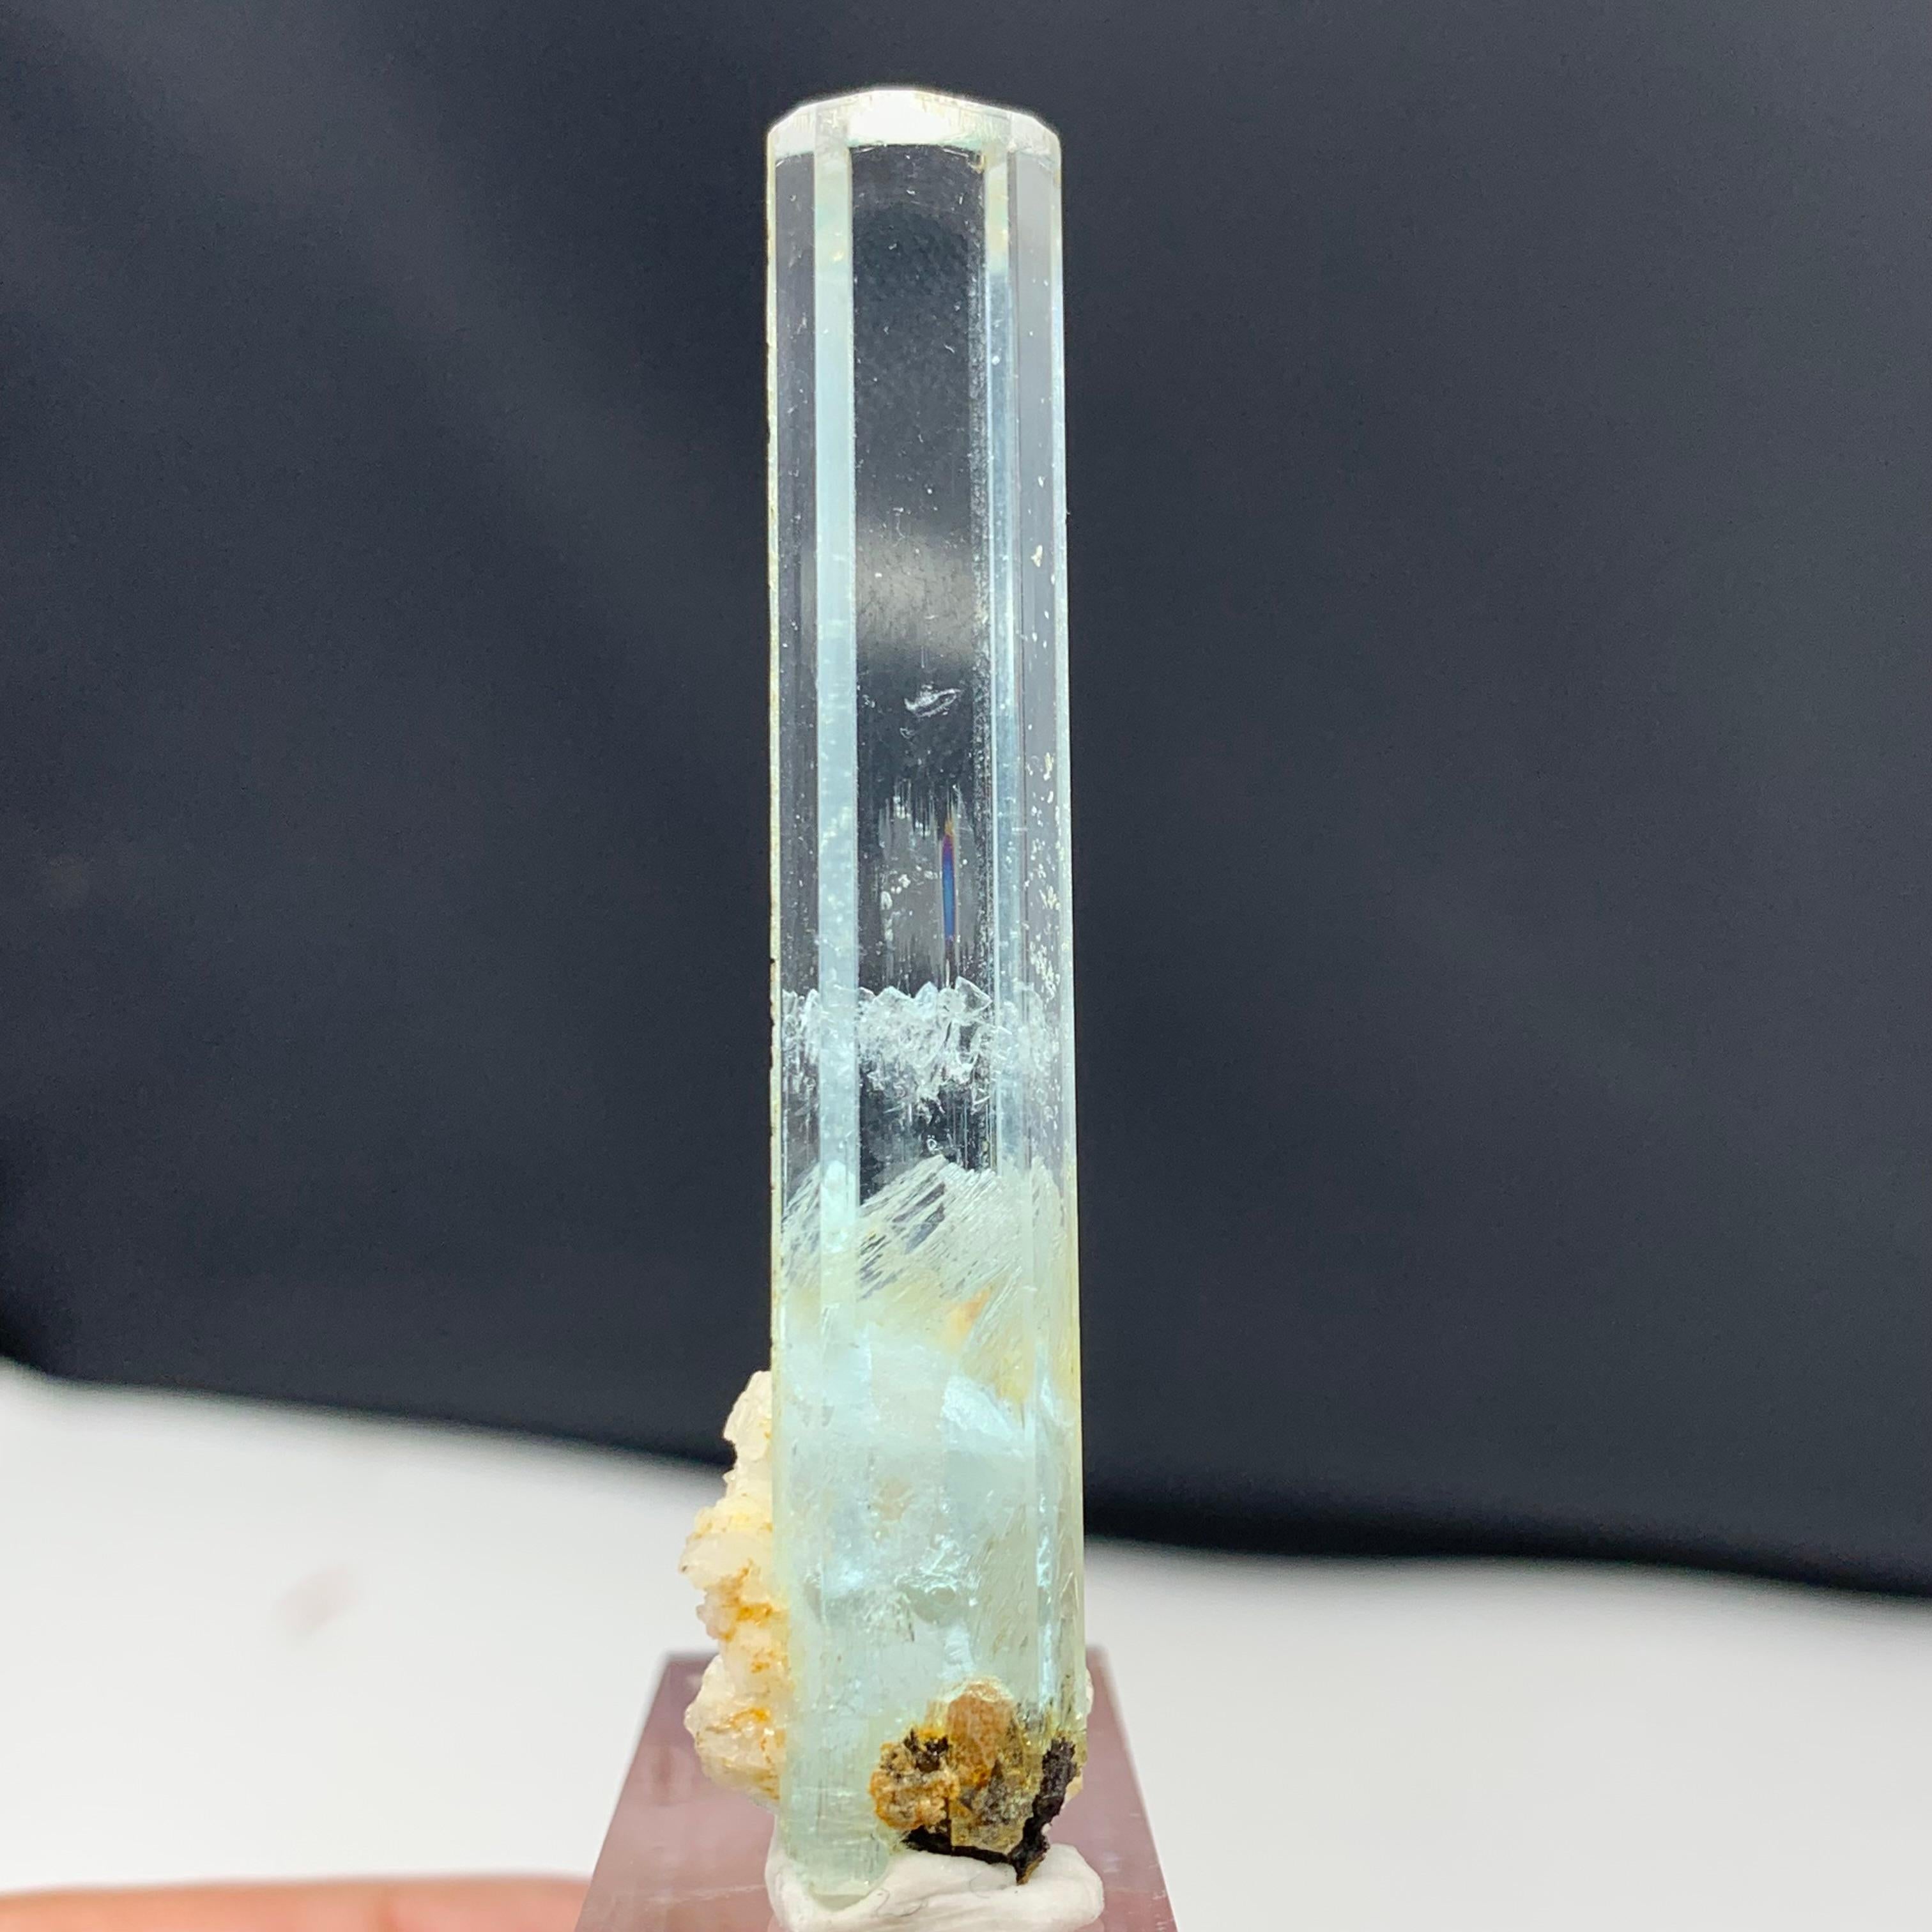 10.36 Gram Incredible Aquamarine Specimen From Skardu, Pakistan 

Weight : 10.36 Gram 
Dimension: 5.7 x 1.4 x 1.2 Cm 
Origin: Skardu, Pakistan 

Aquamarine is a pale-blue to light-green variety of beryl. The color of aquamarine can be changed by